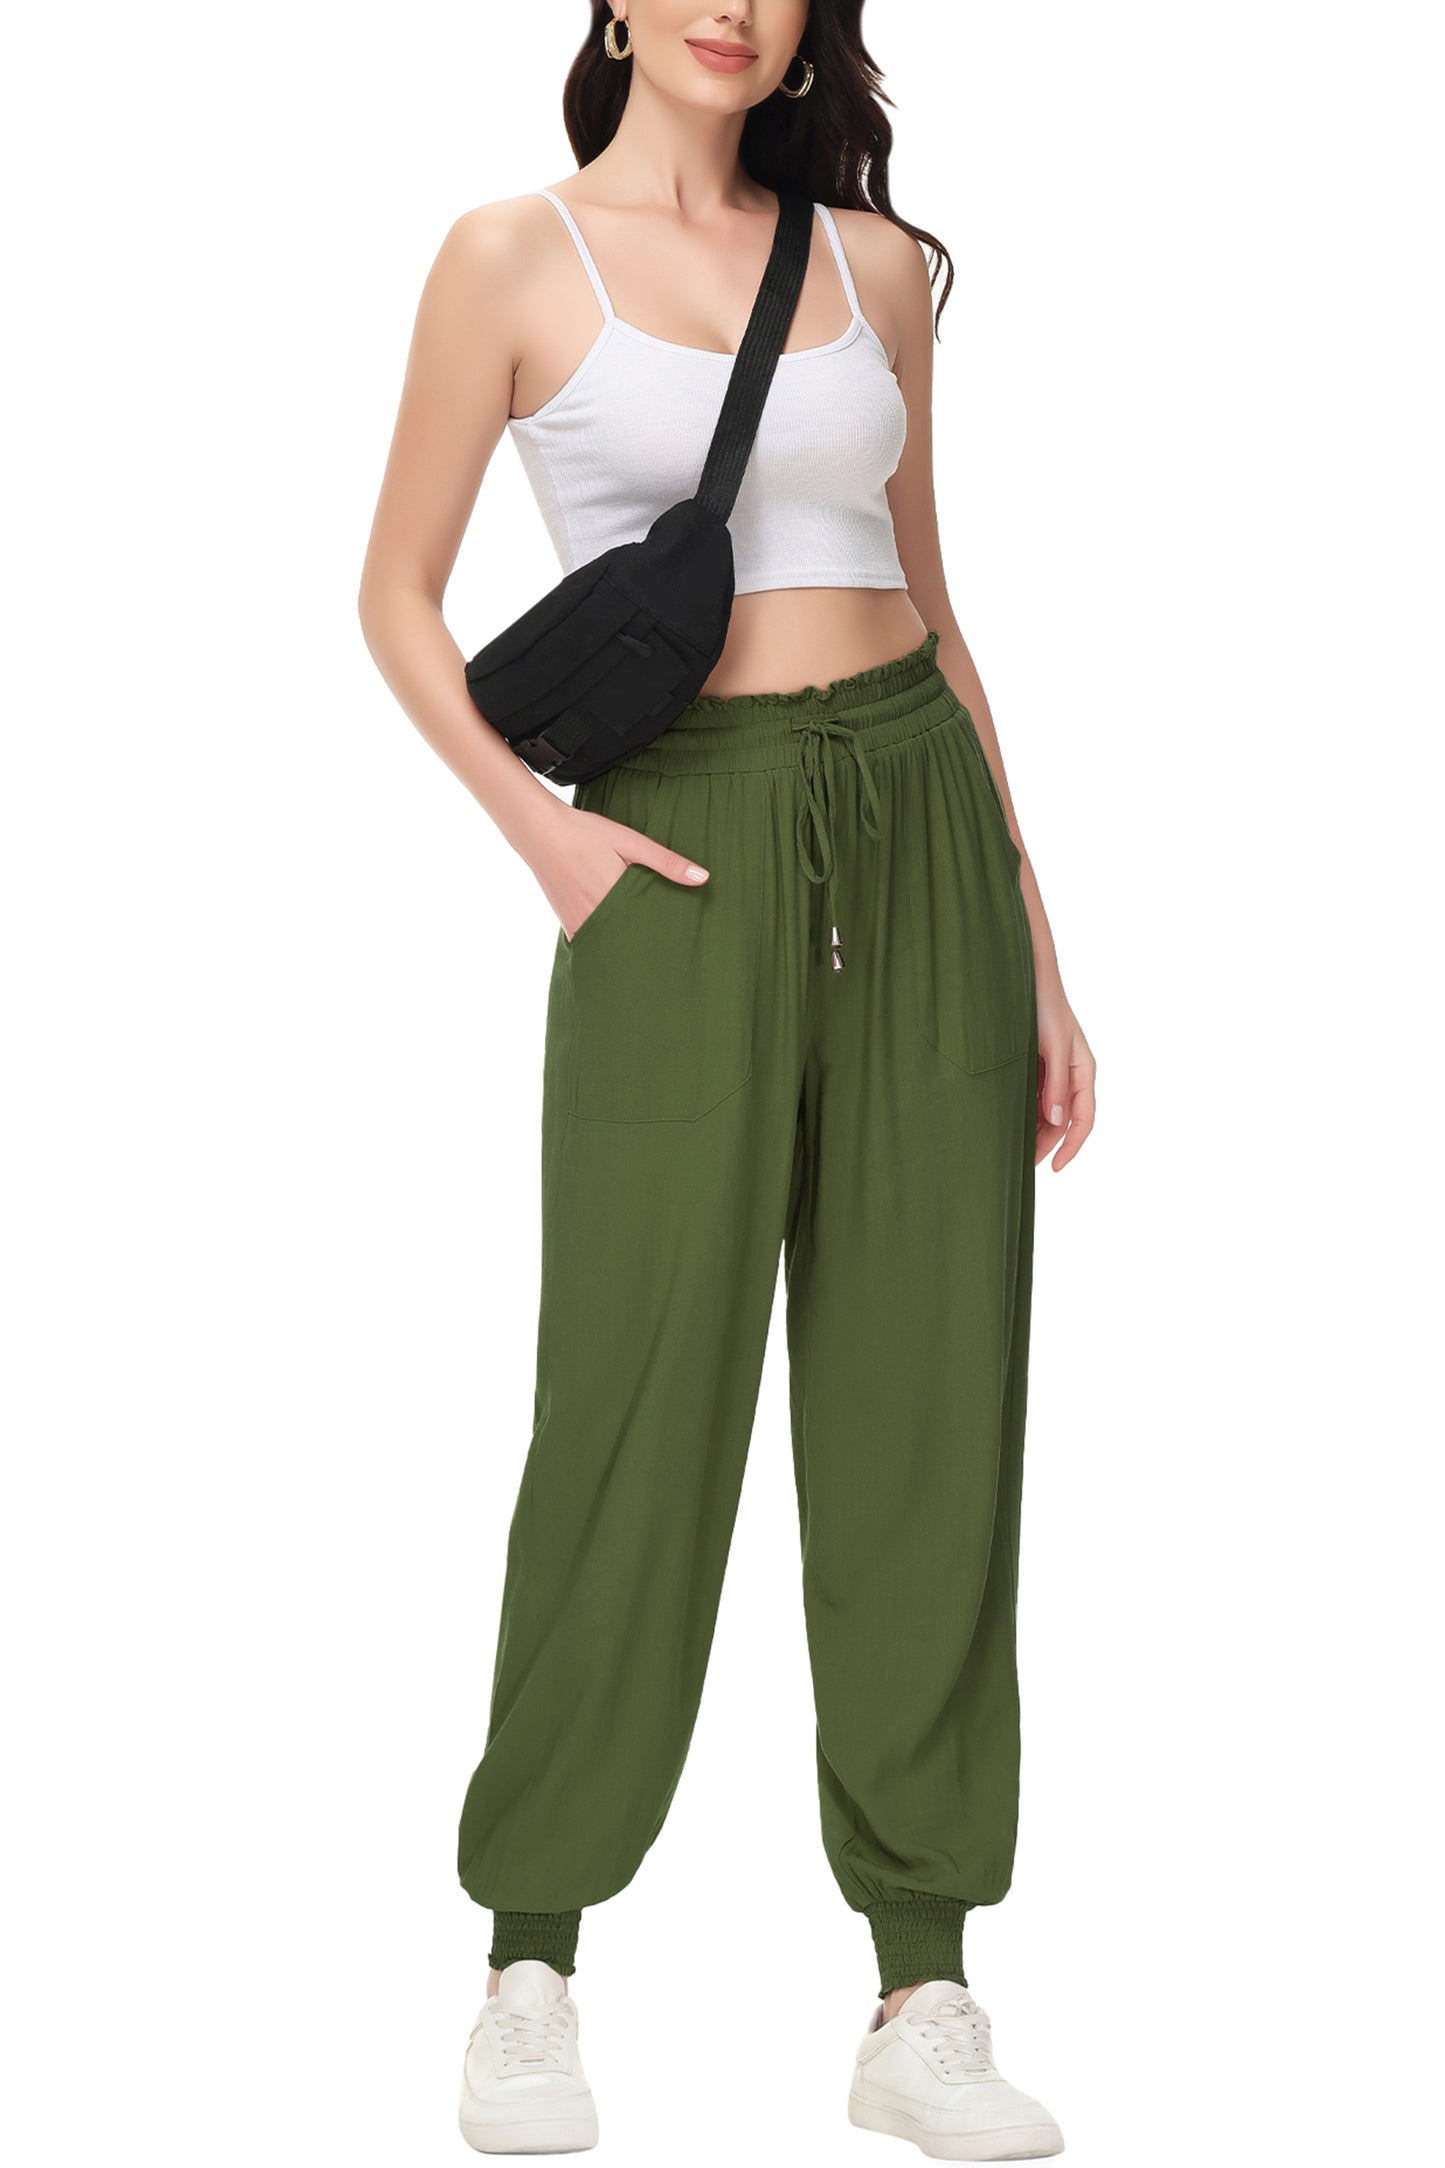 Anna-Kaci Women's Summer Lounge Pants Casual Loose High Waist Tapered Jogger Pants Drawstring Trousers with Pockets